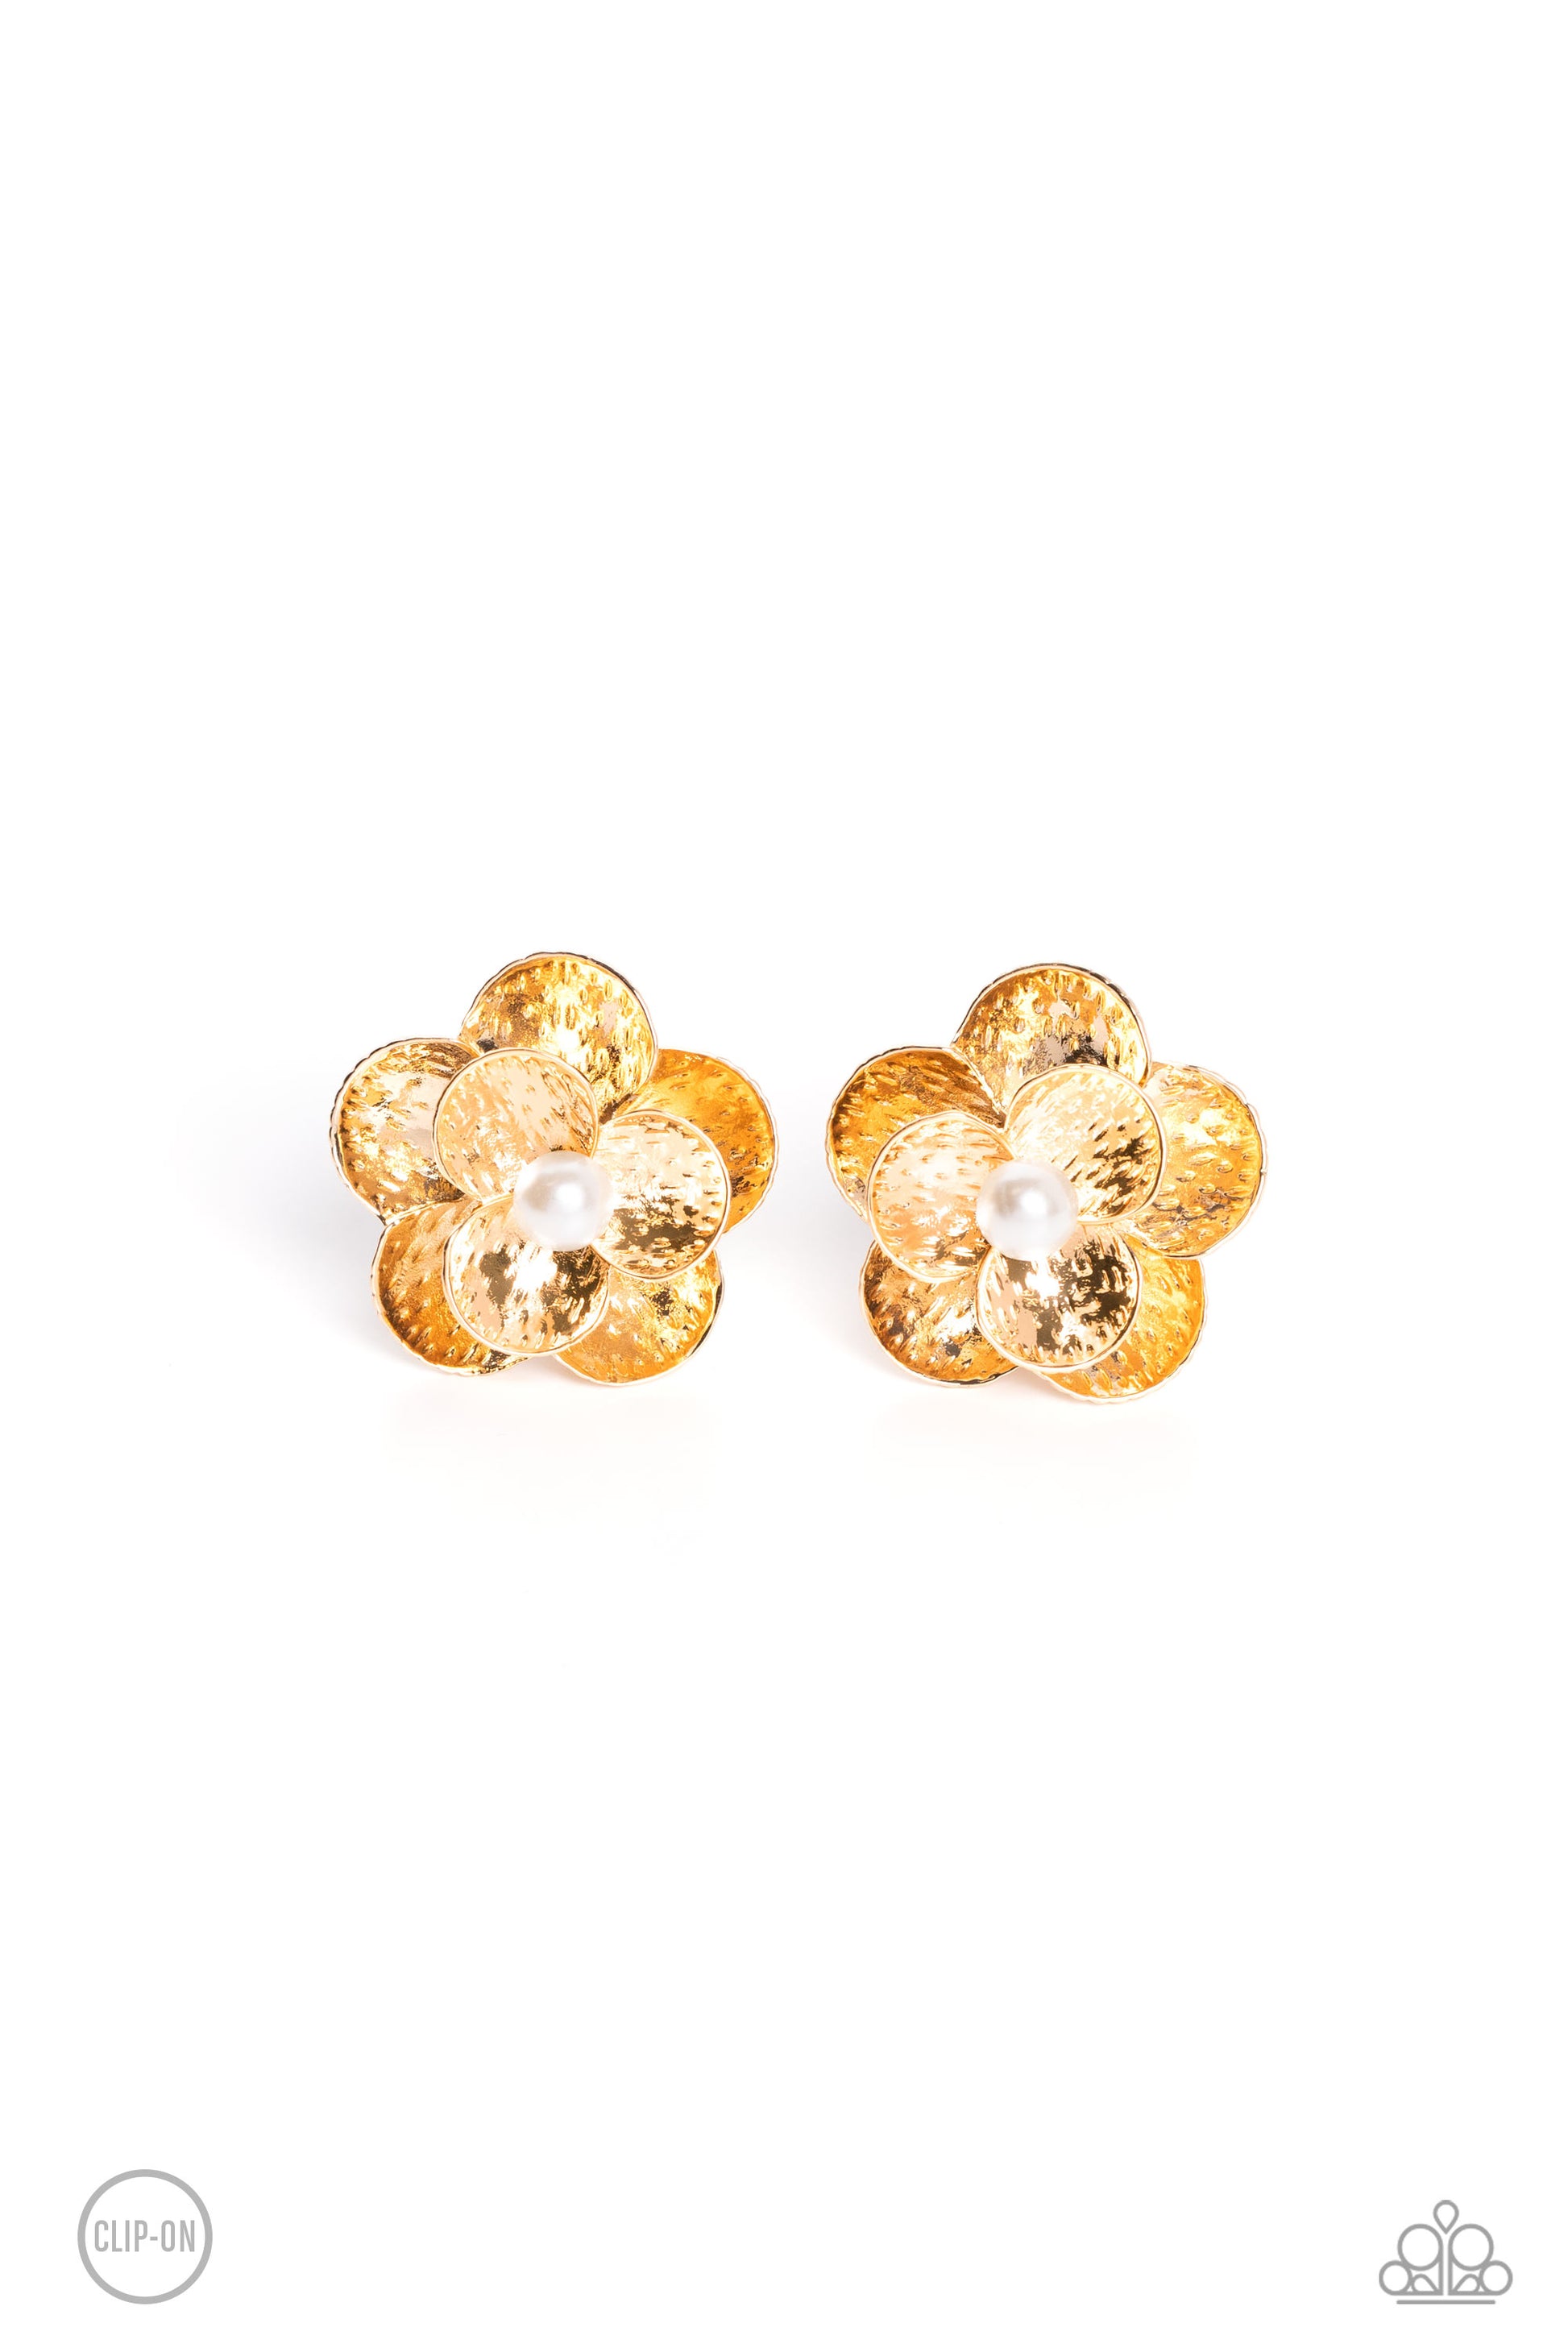 Flaring out from a white pearl center, gold flowers, featuring studded petals, grace the ear. An oversized gold flower, featuring the same studded design as the smaller flower, creates the 3D design and draws additional attention to the whimsical design. Earring attaches to a standard clip-on fitting.  Sold as one pair of clip-on earrings.  Clip On Earring